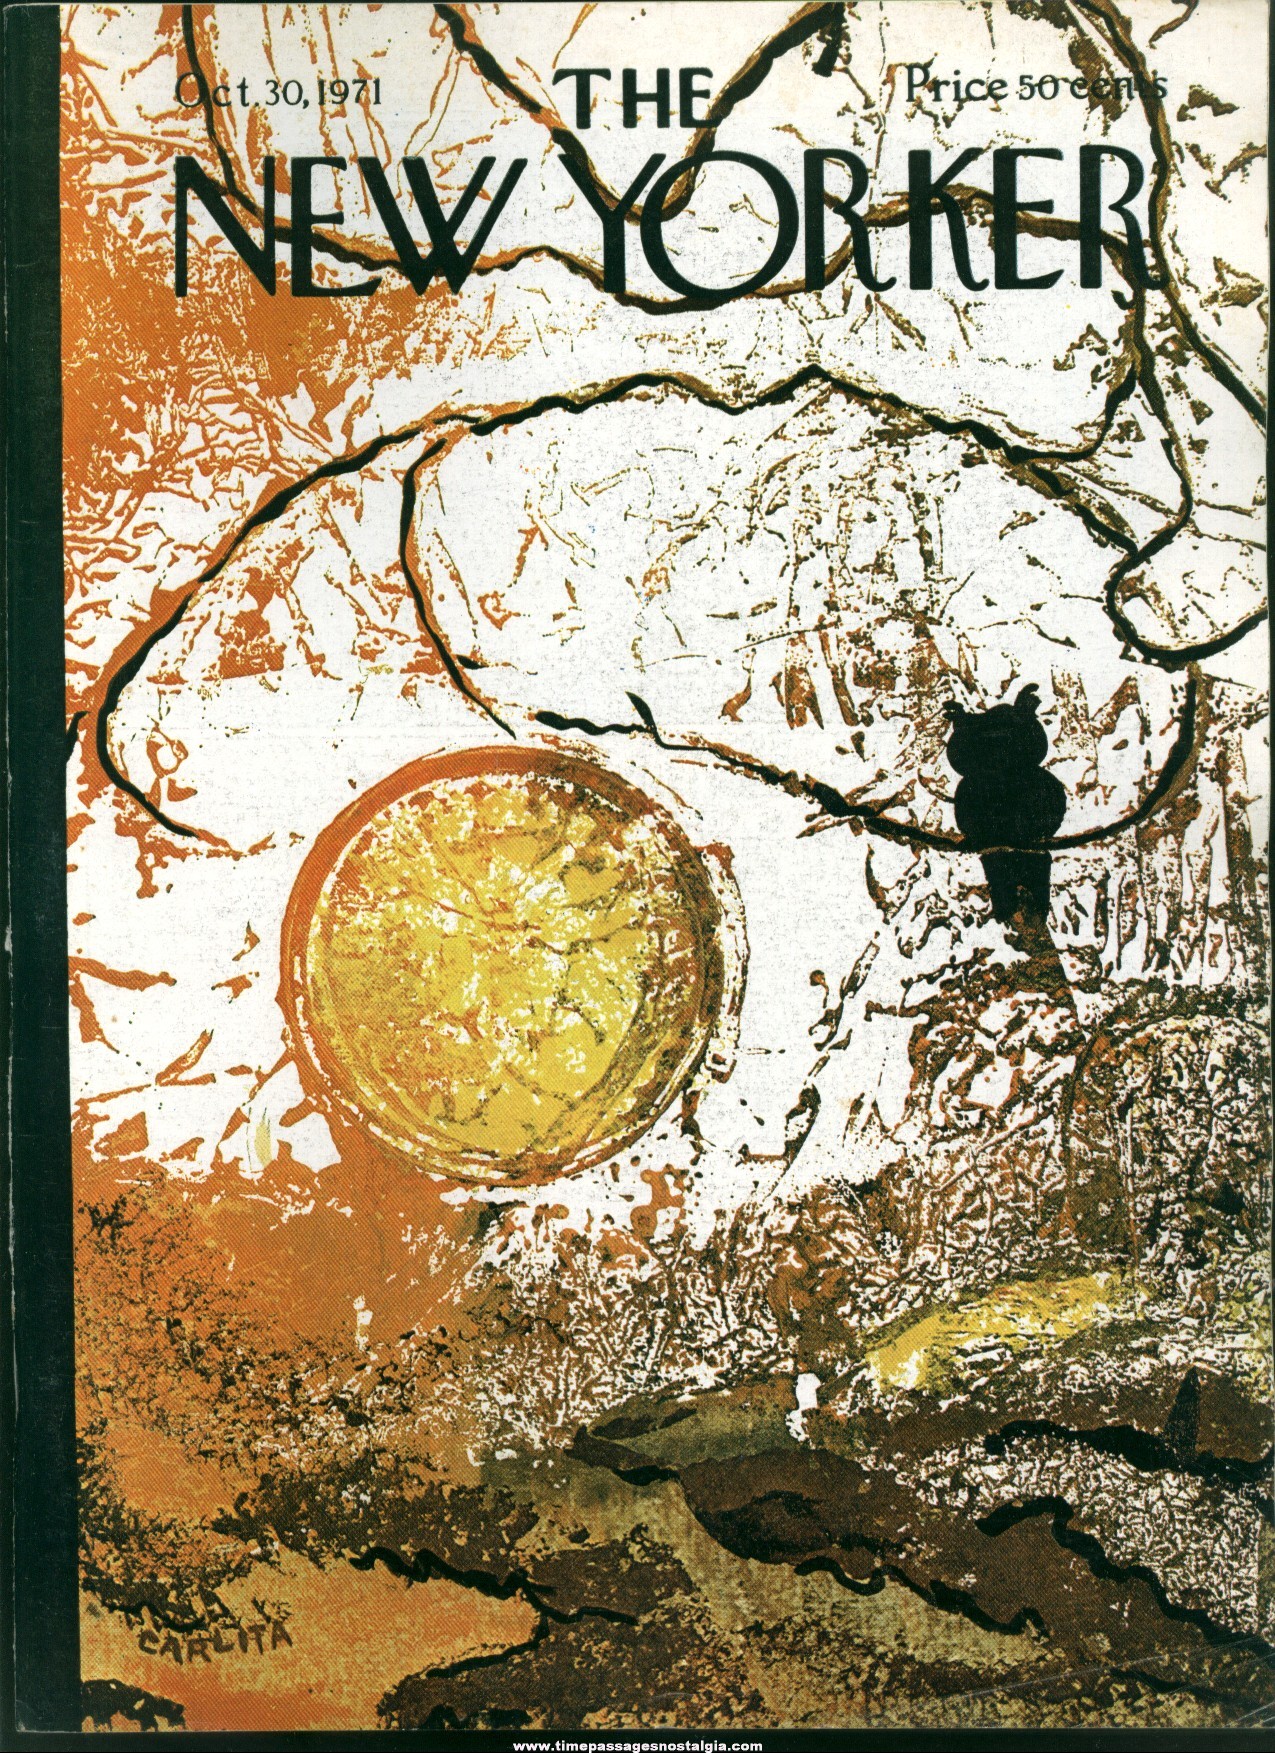 New Yorker Magazine - October 30, 1971 - Cover by Carlita Hunt